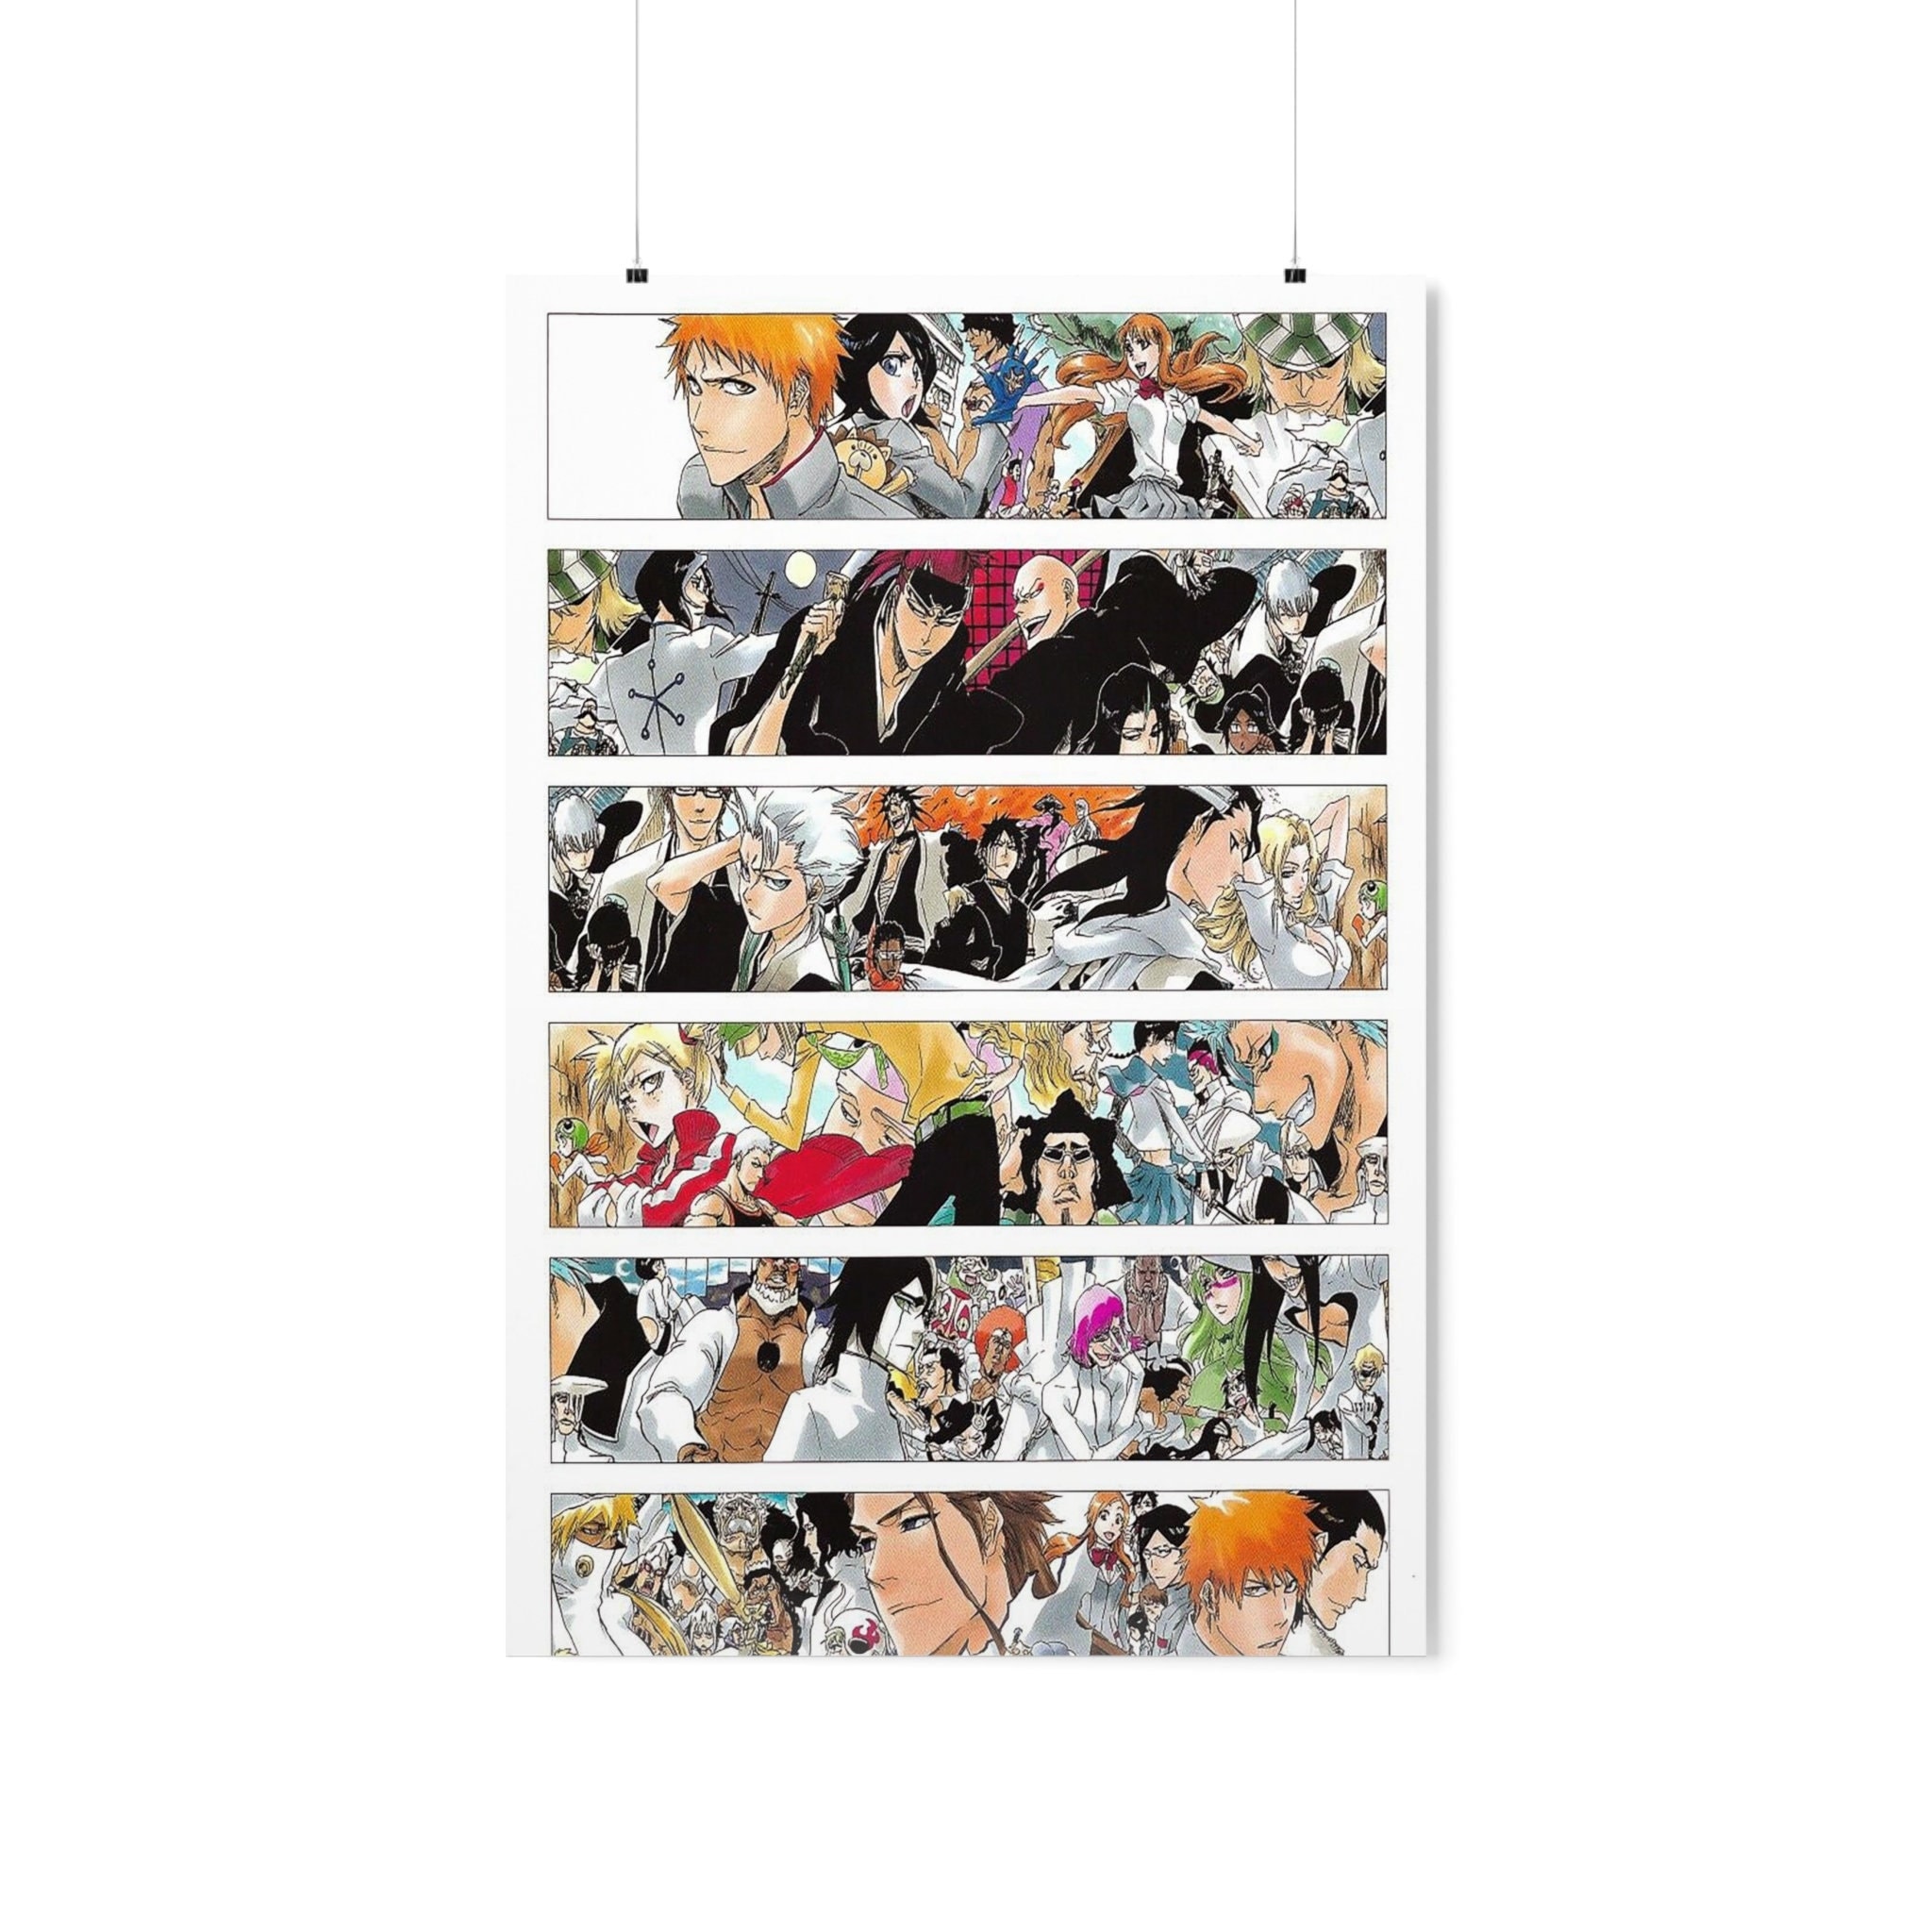 Bleach Characters Wallpaper High quality bleach inspired t shirts posters  mugs and more by independent artists a…